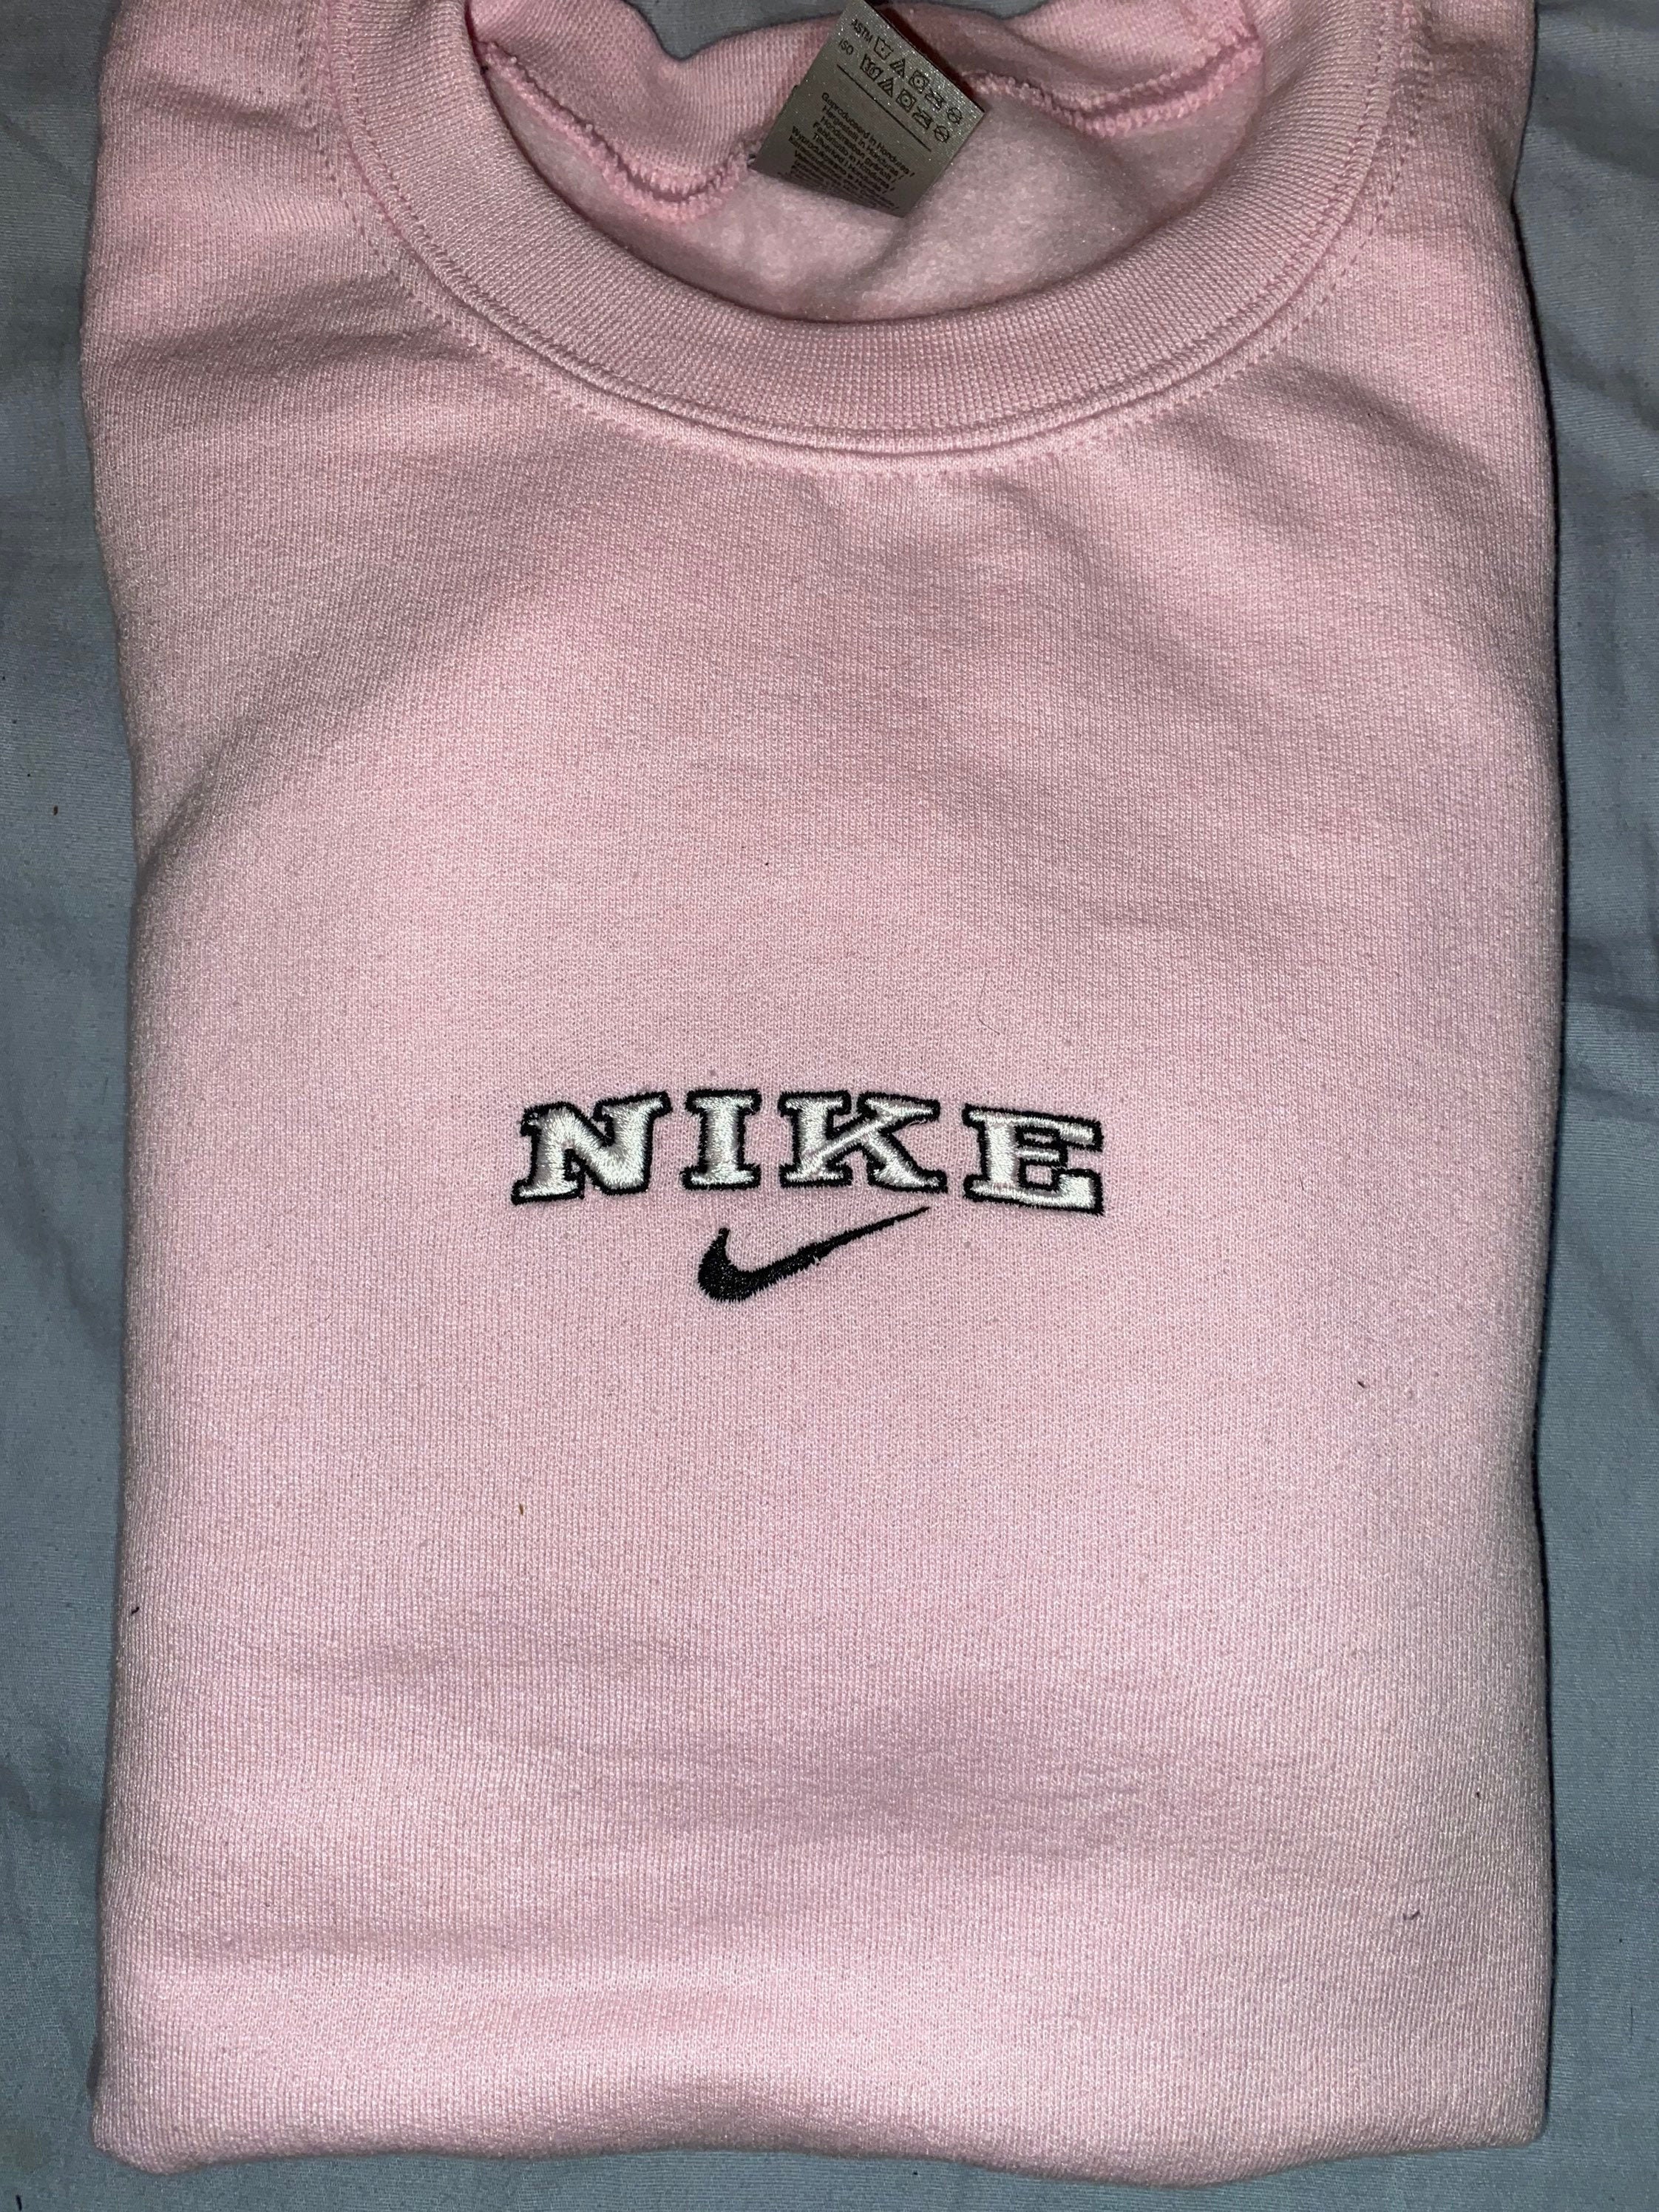 Pink Nike Inspired Spellout Sweater | Etsy